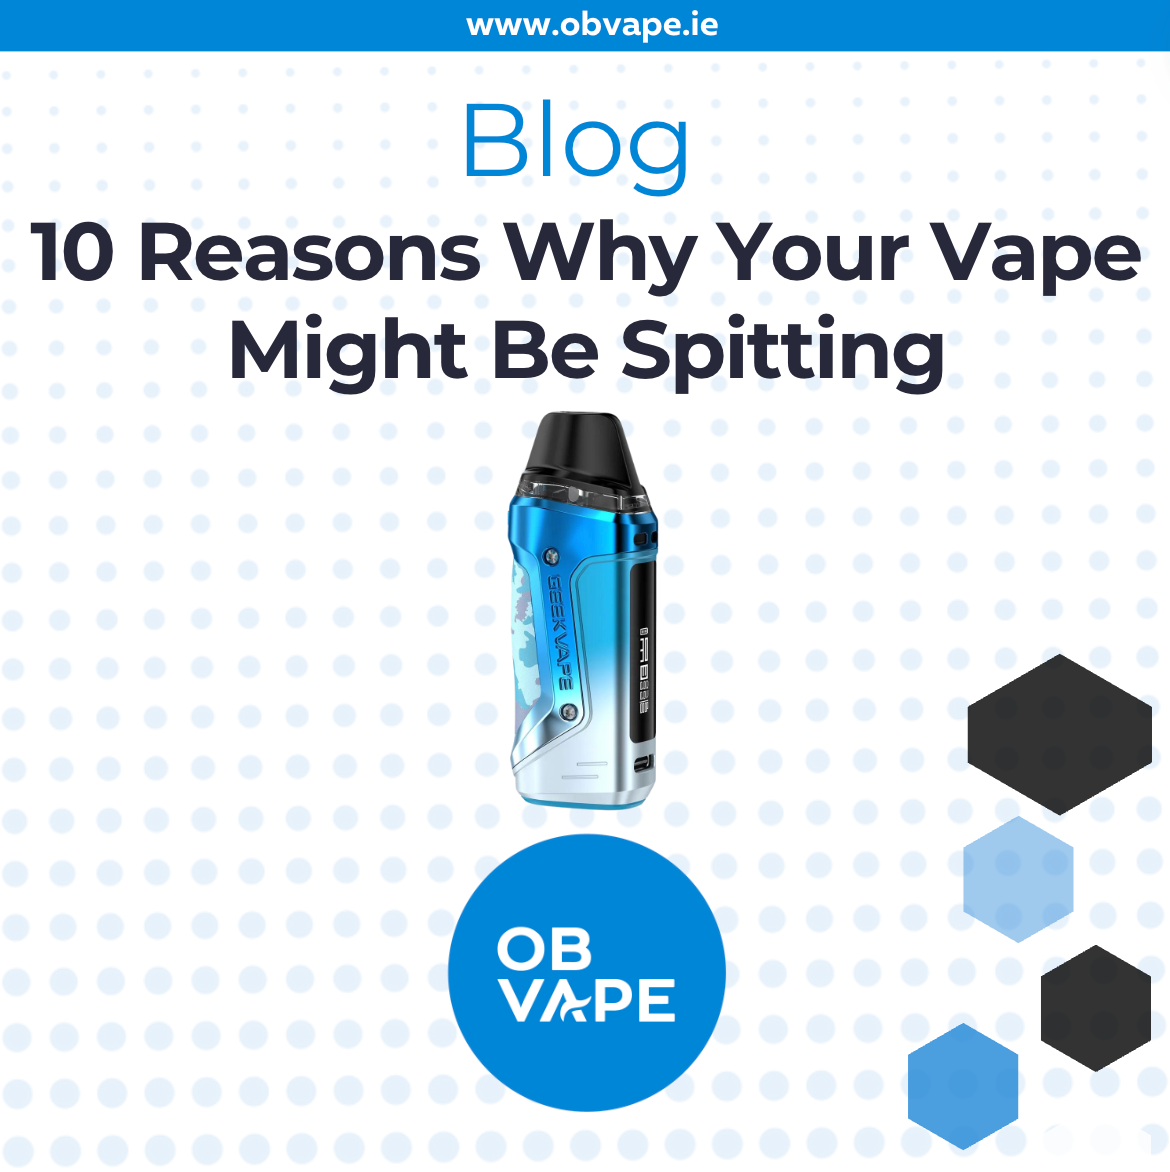 10 Reasons Why Your Vape Might Be Spitting